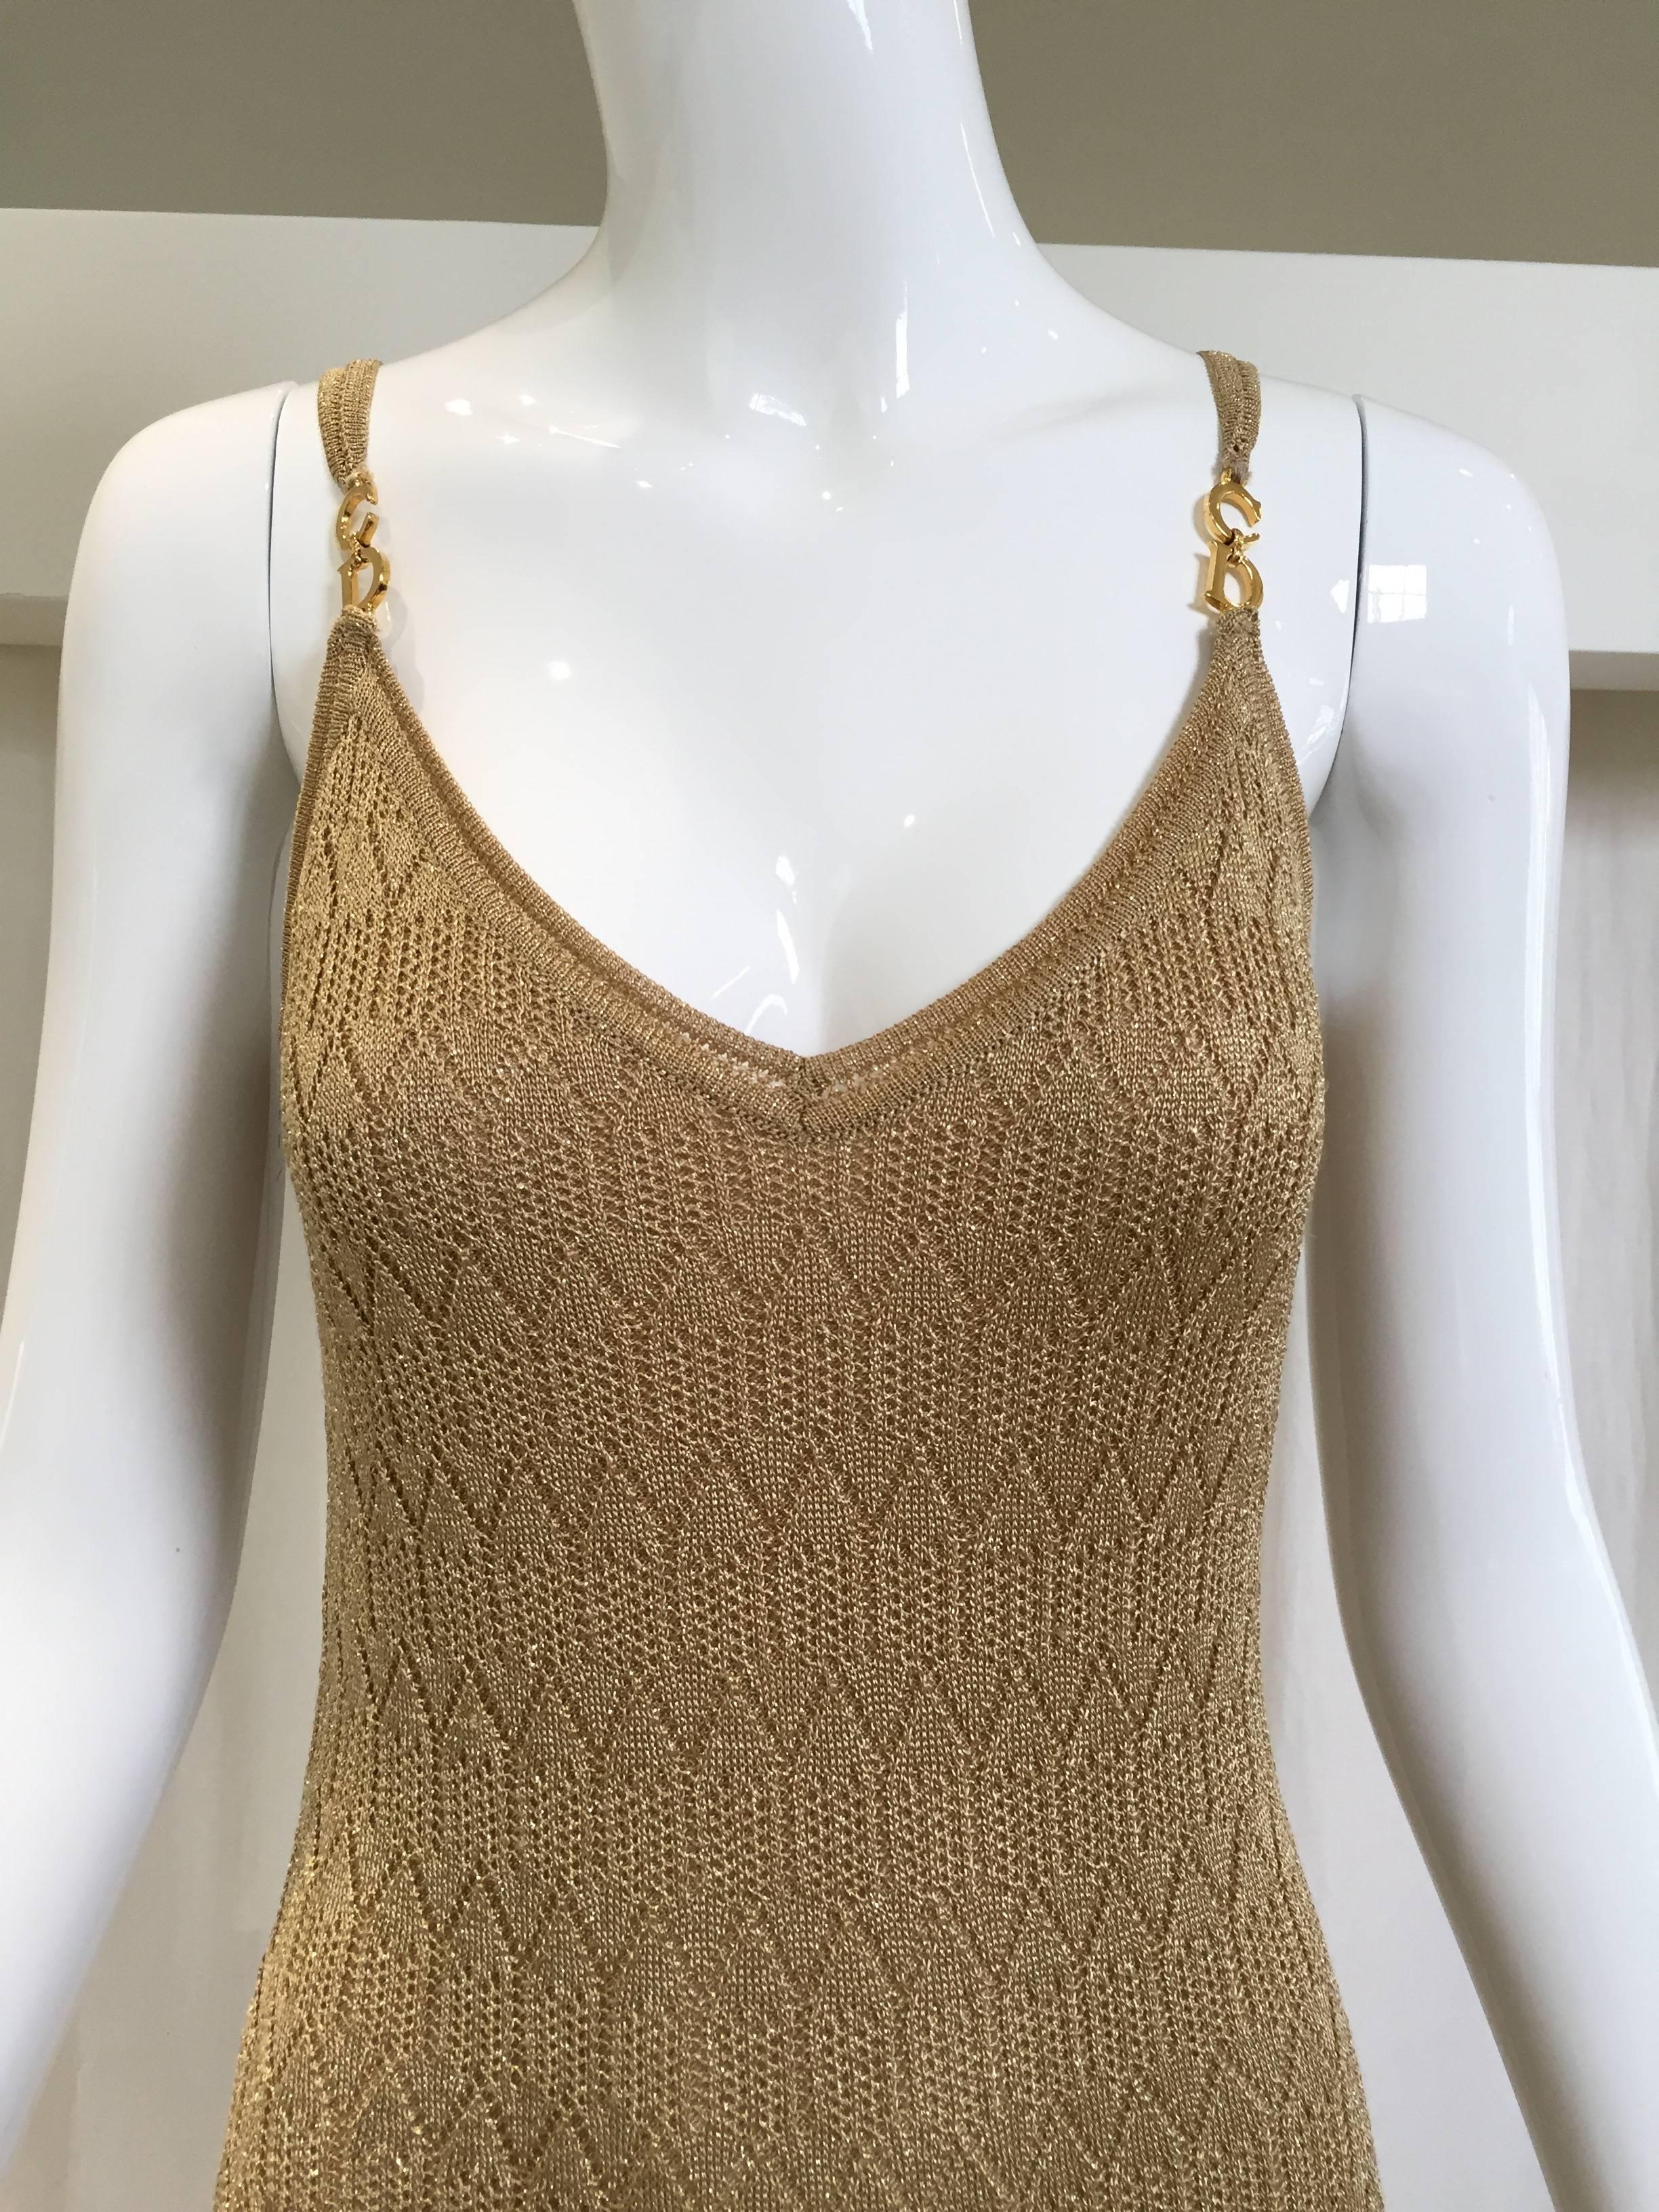 Vintage Christian Dior by john galliano gold metallic knit dress from 1990s. 
Bust: 32"/ Waist: 27"/ hip: 32"
Dress is stretchy . Fit size 2/4/6